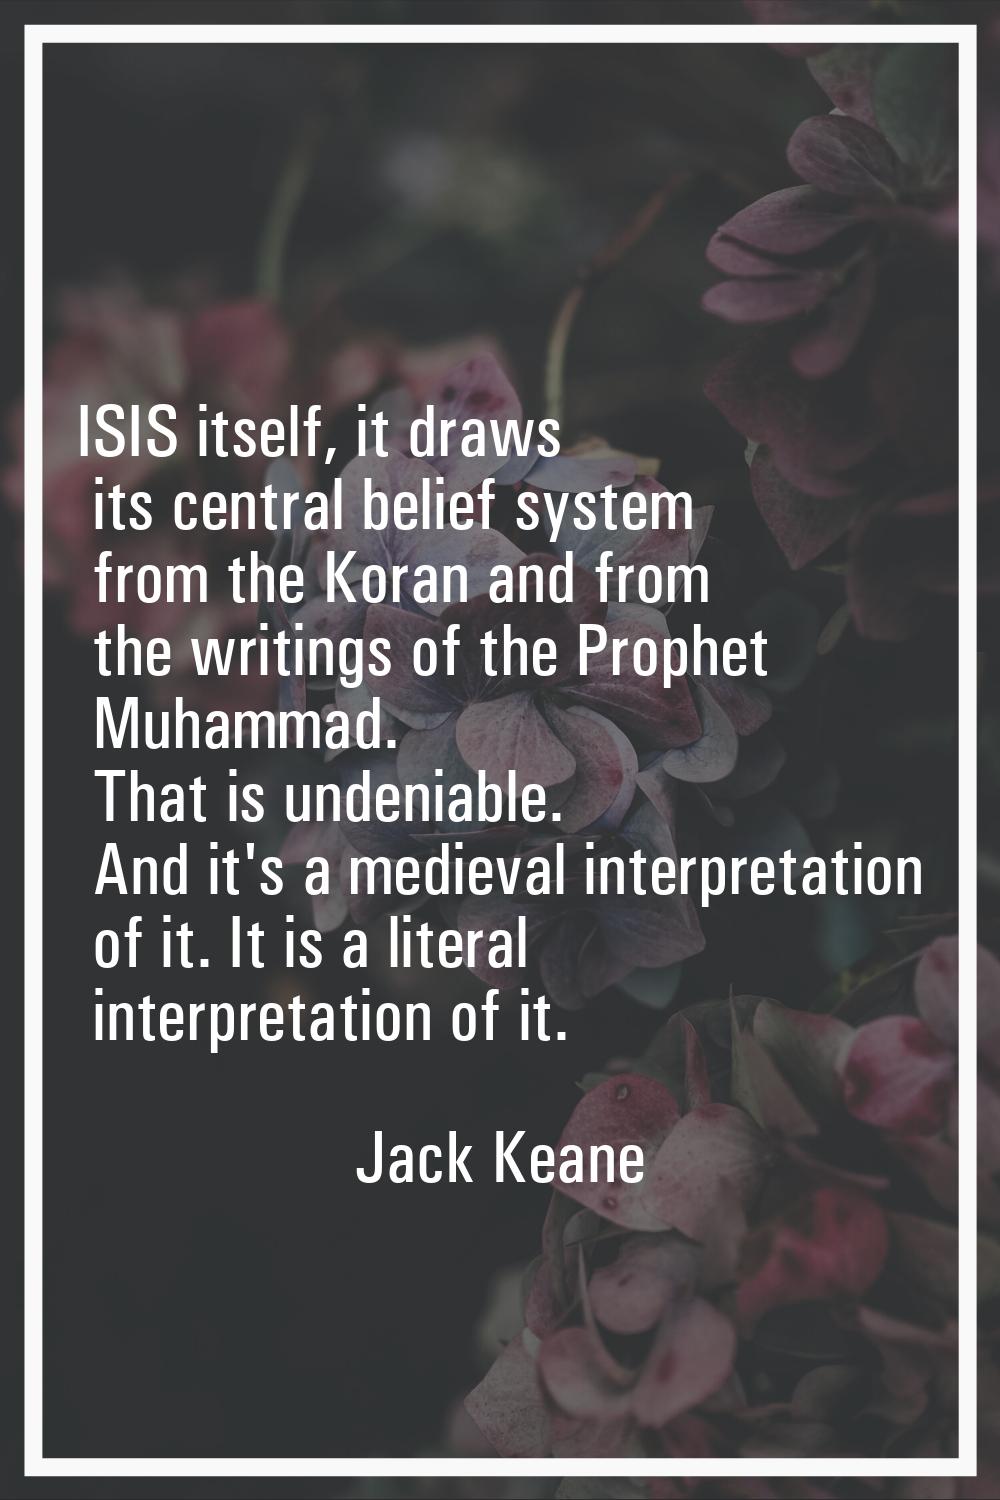 ISIS itself, it draws its central belief system from the Koran and from the writings of the Prophet